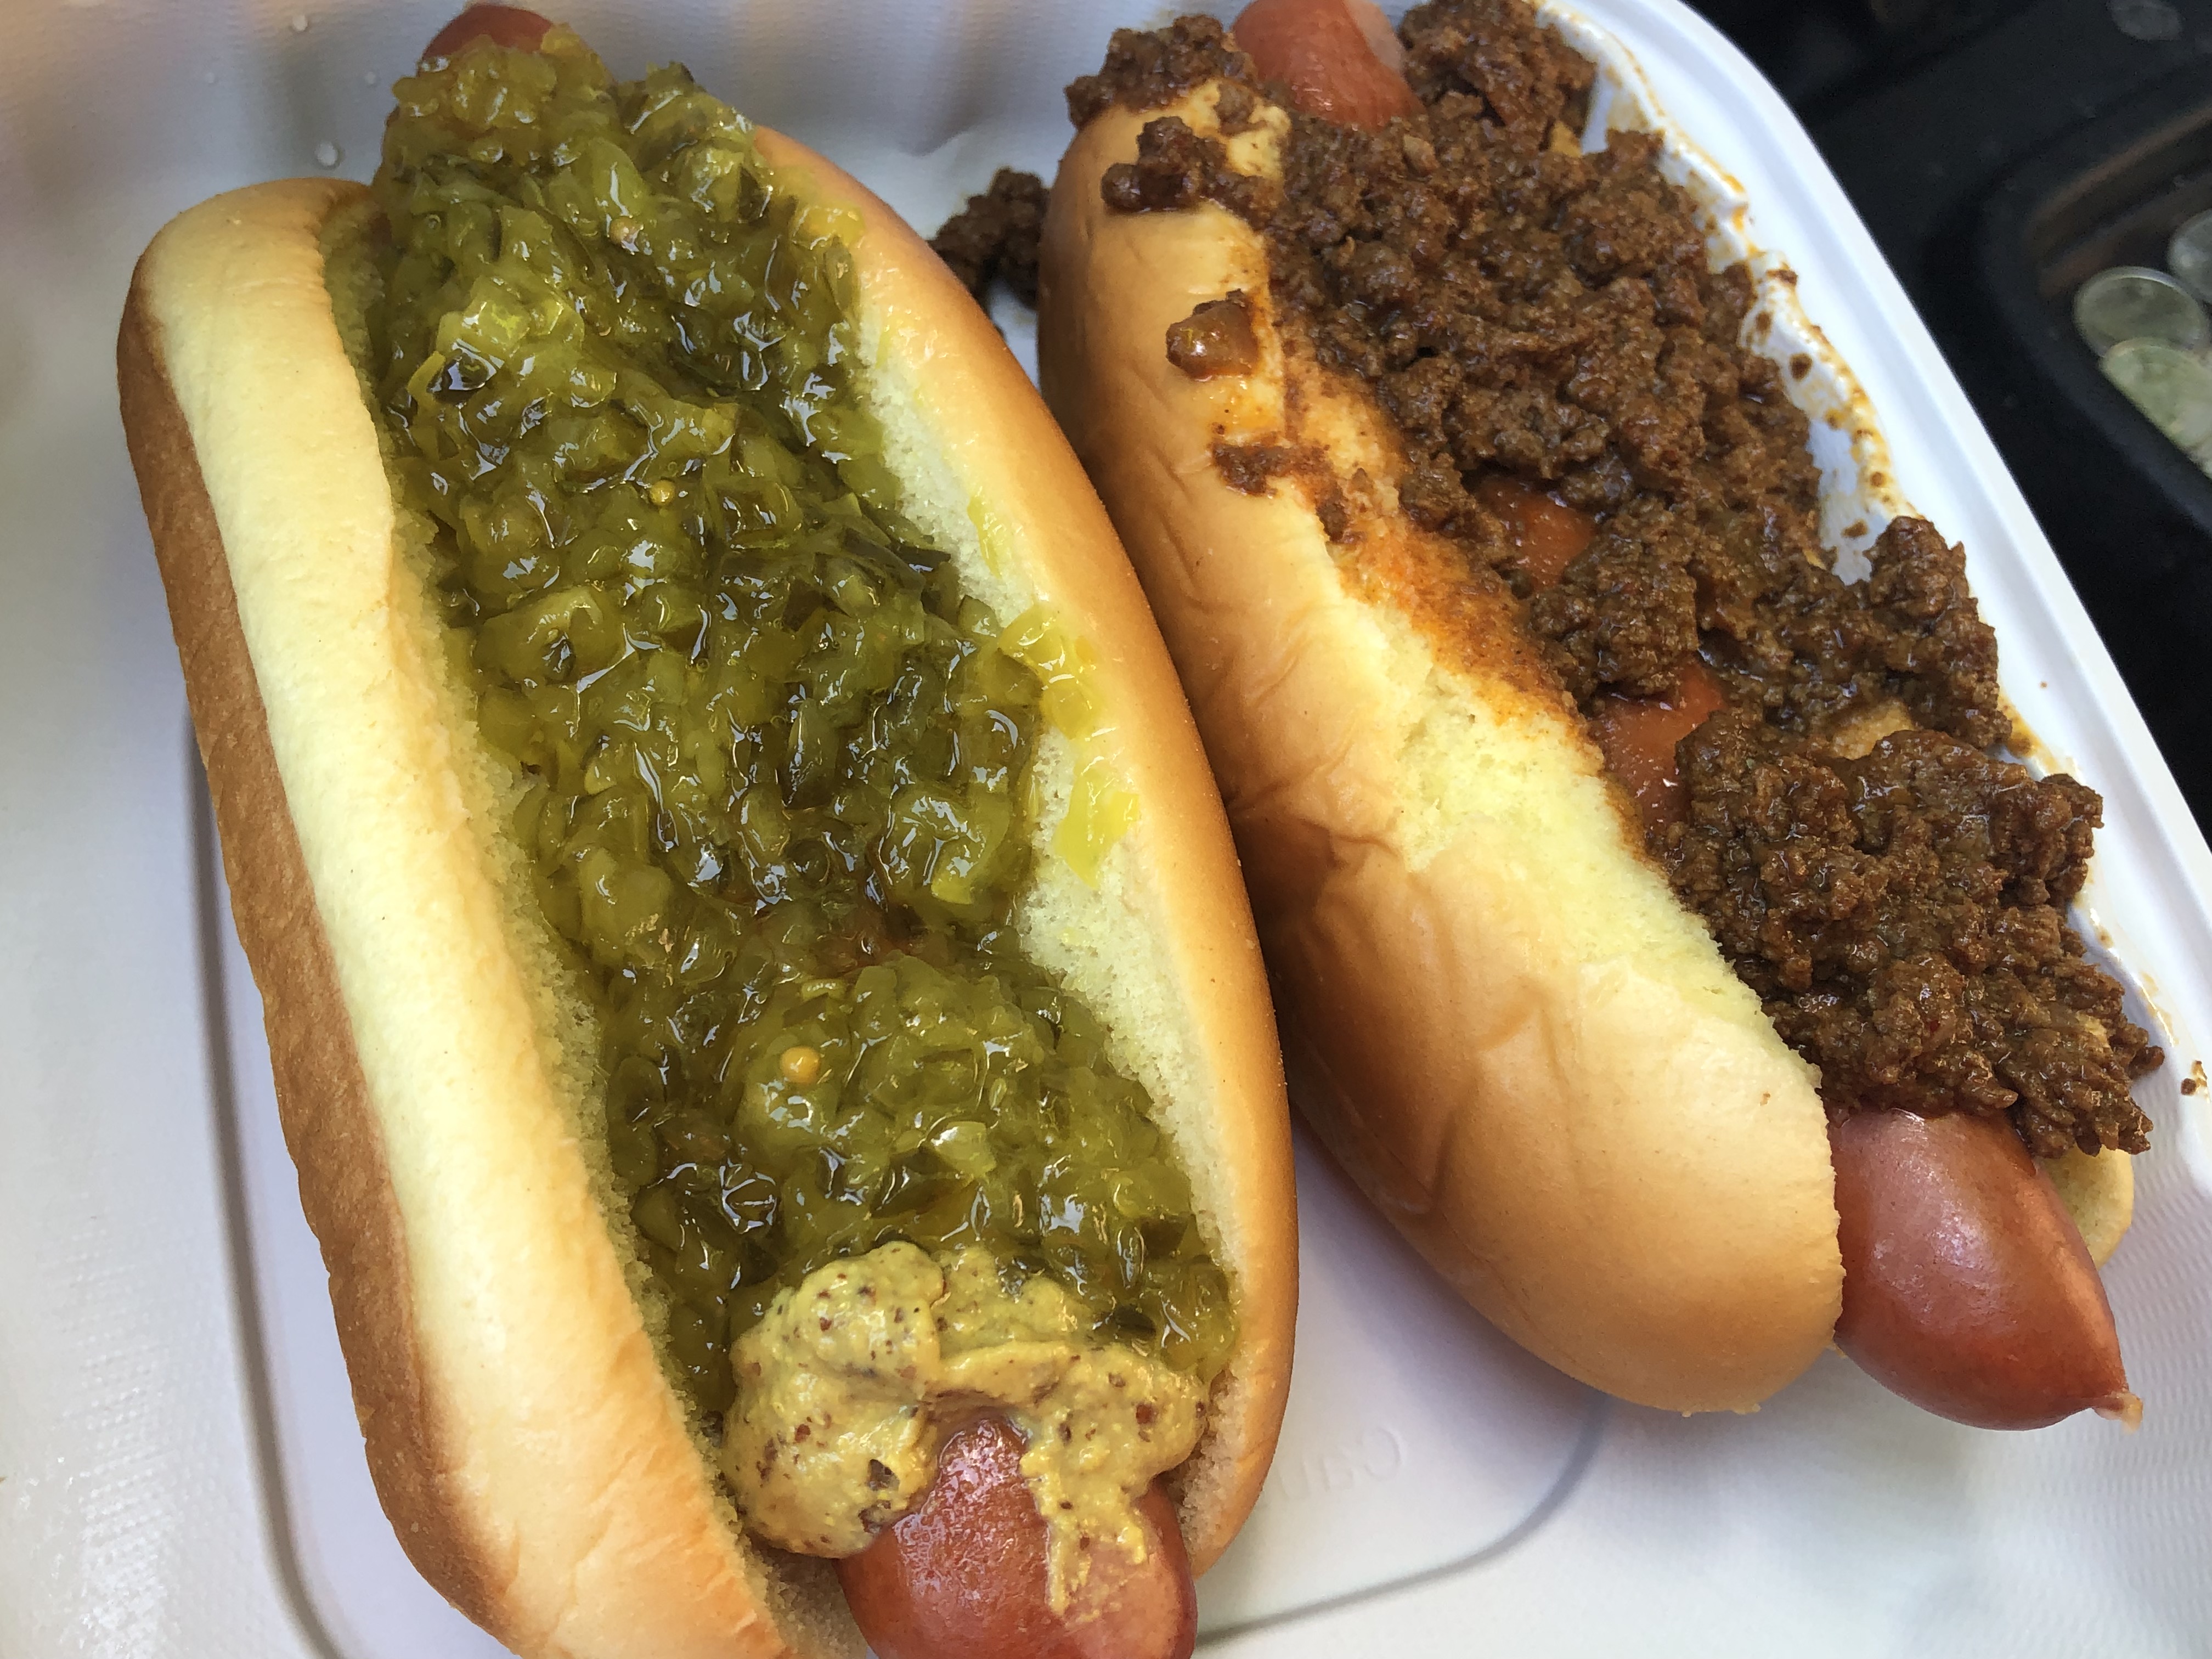 If you can't get to New Jersey for a Classic Italian Hot Dog